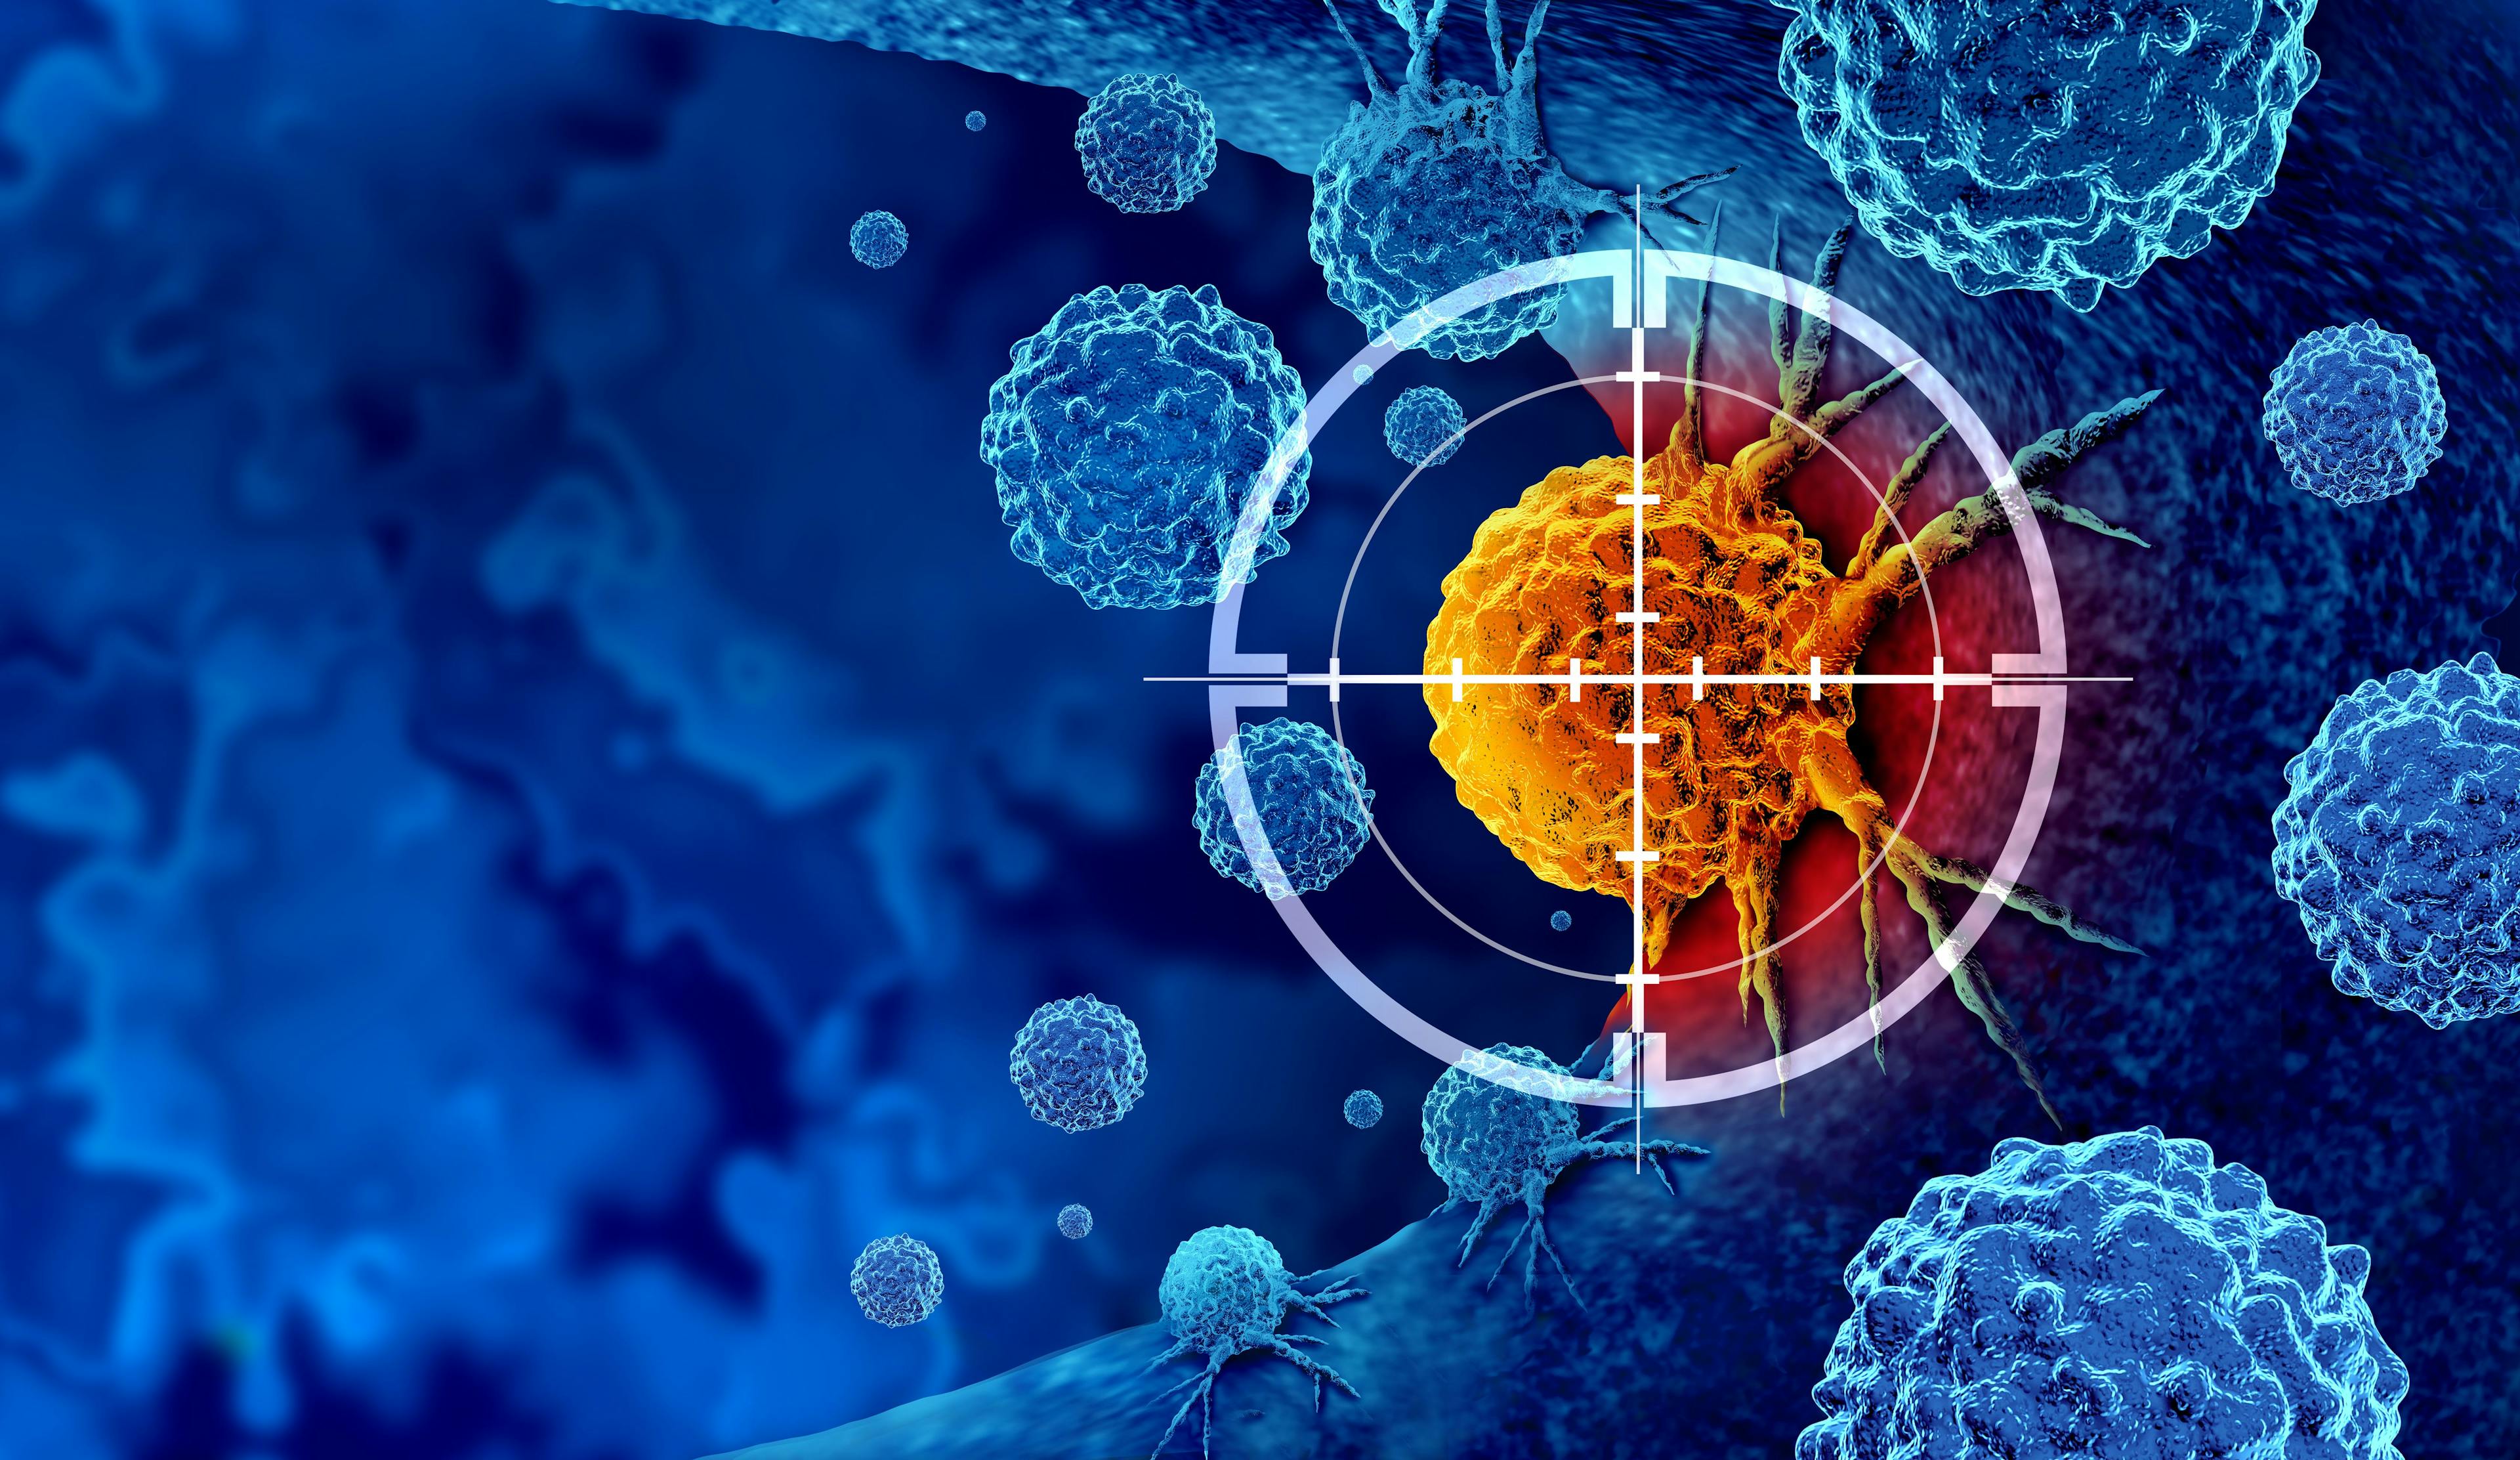 Cancer detection and screening as a treatment for malignant cells with a biopsy or testing caused by carcinogens and genetics with a cancerous cell as an immunotherapy symbol: © freshidea - stock.adobe.com


